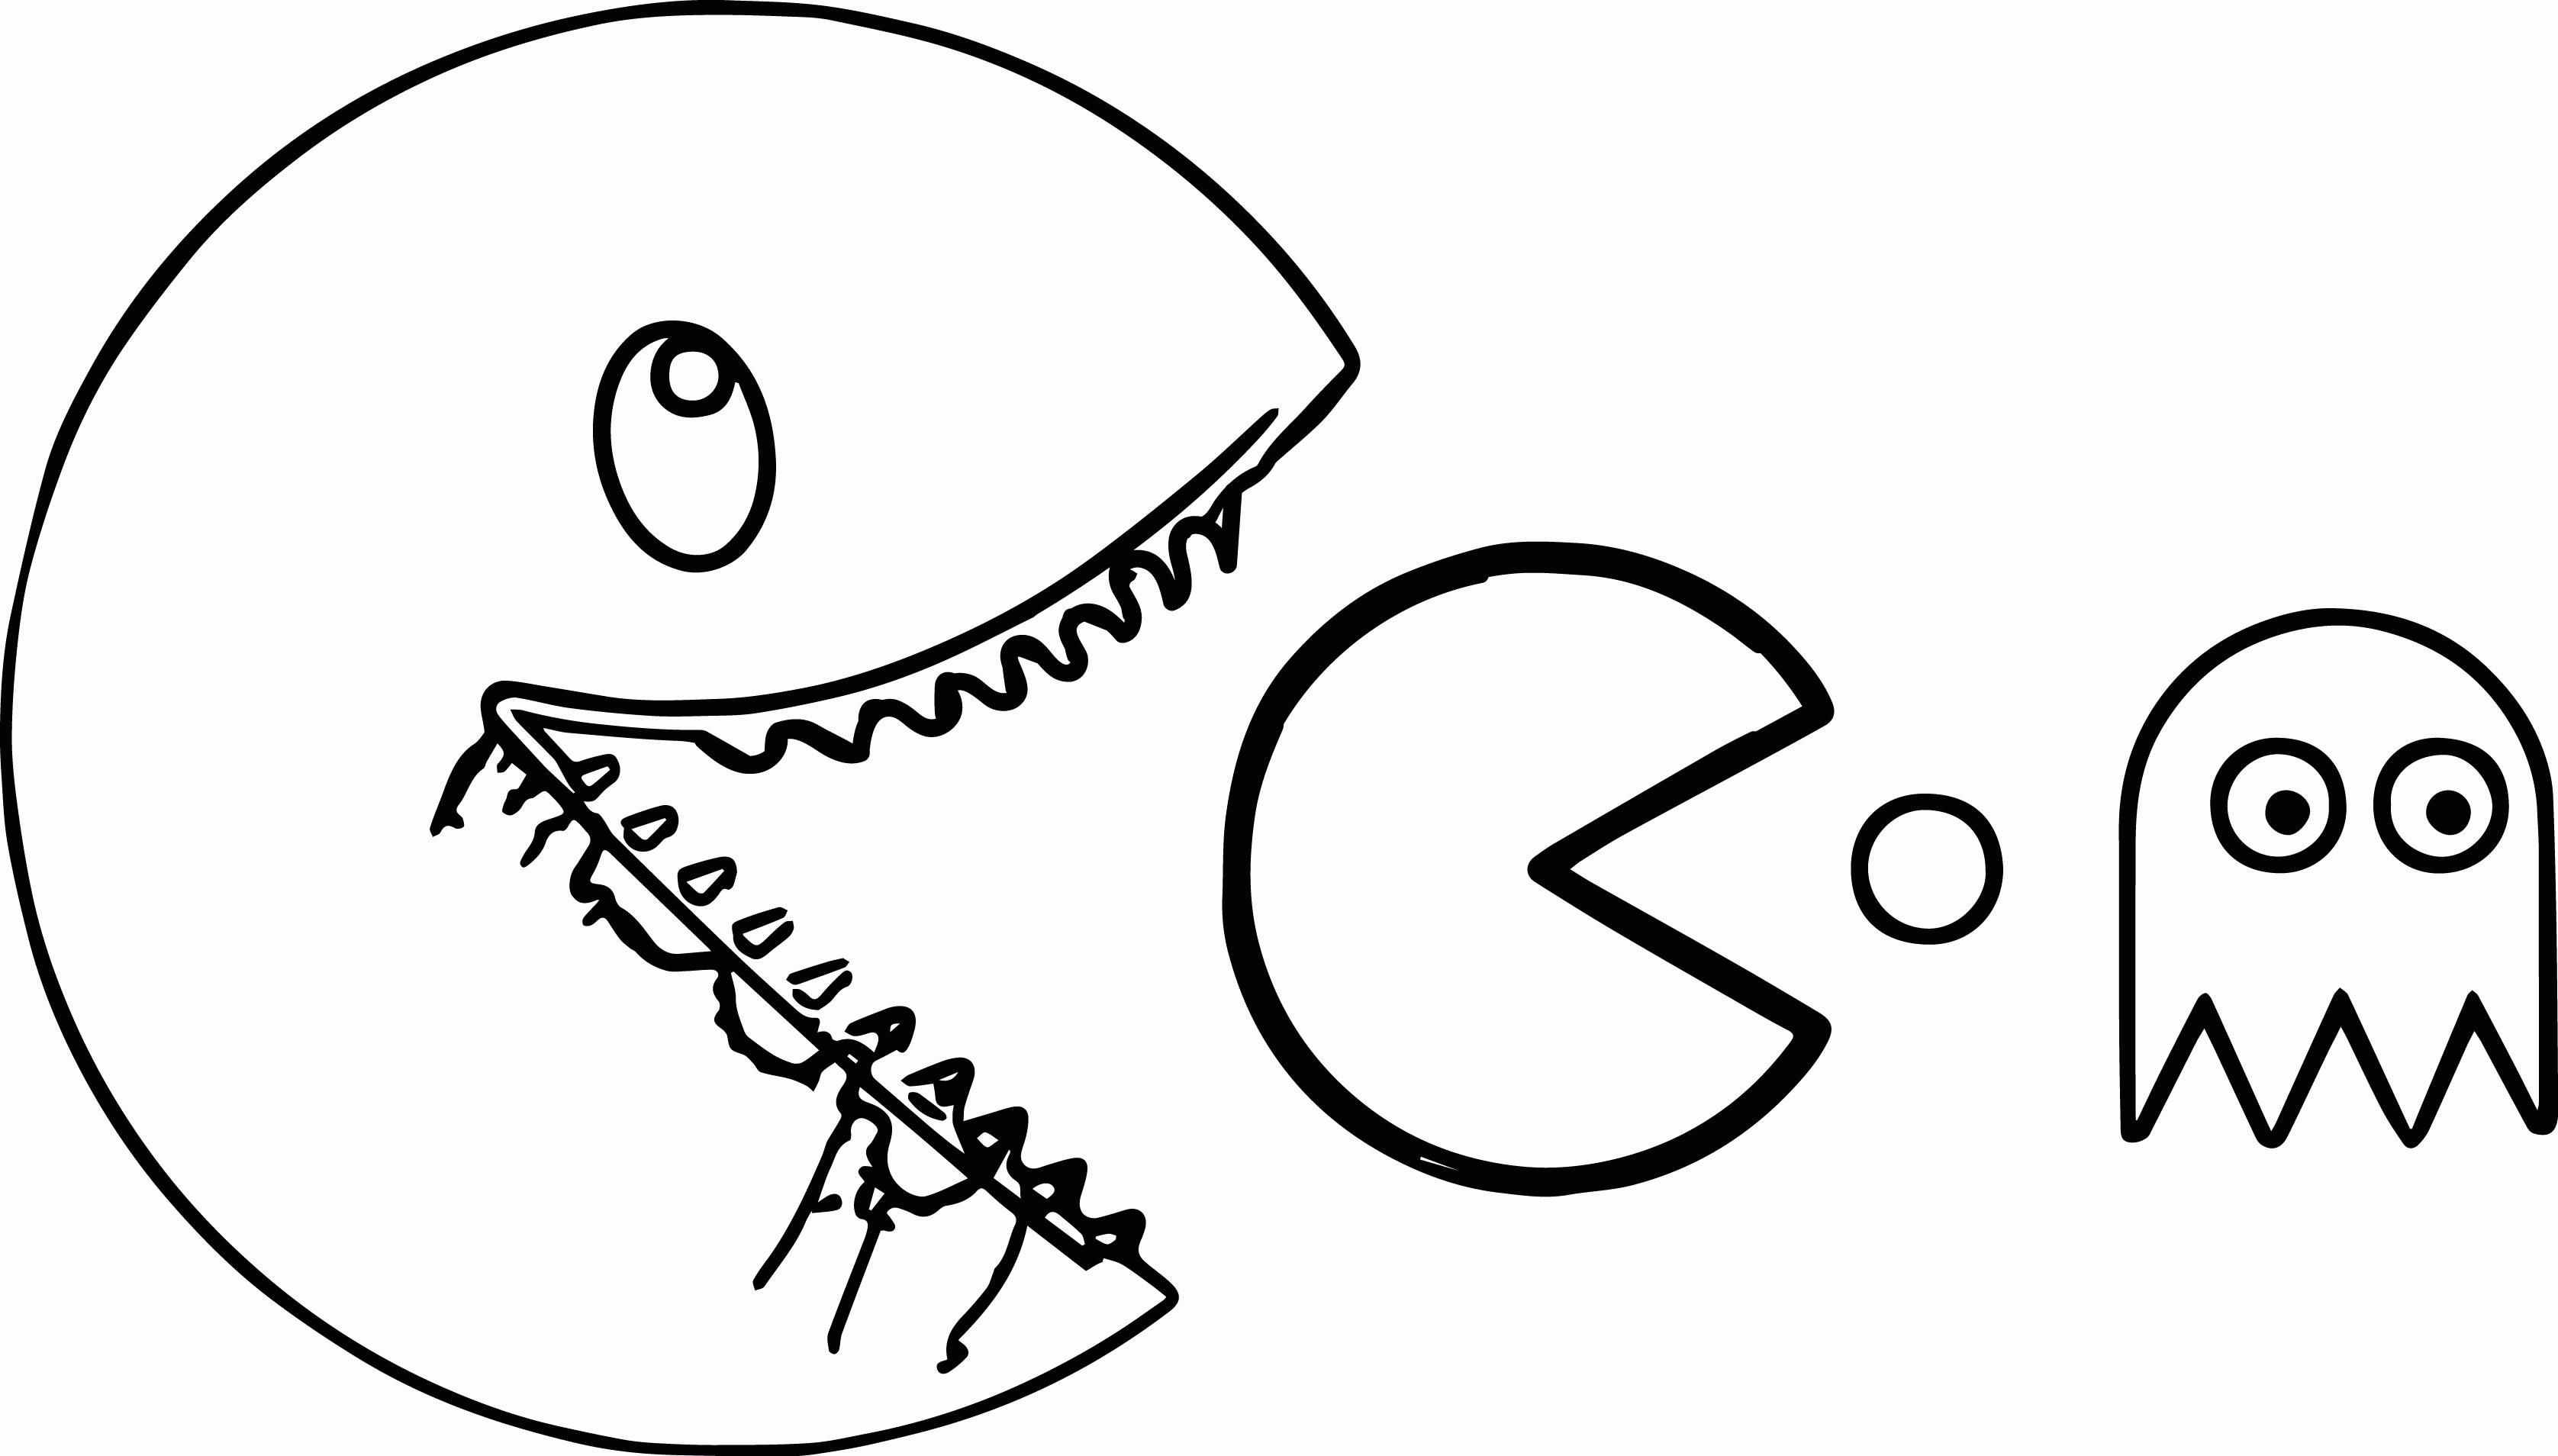 Pac Man Ghostly Adventures Coloring Pages - Coloring Home